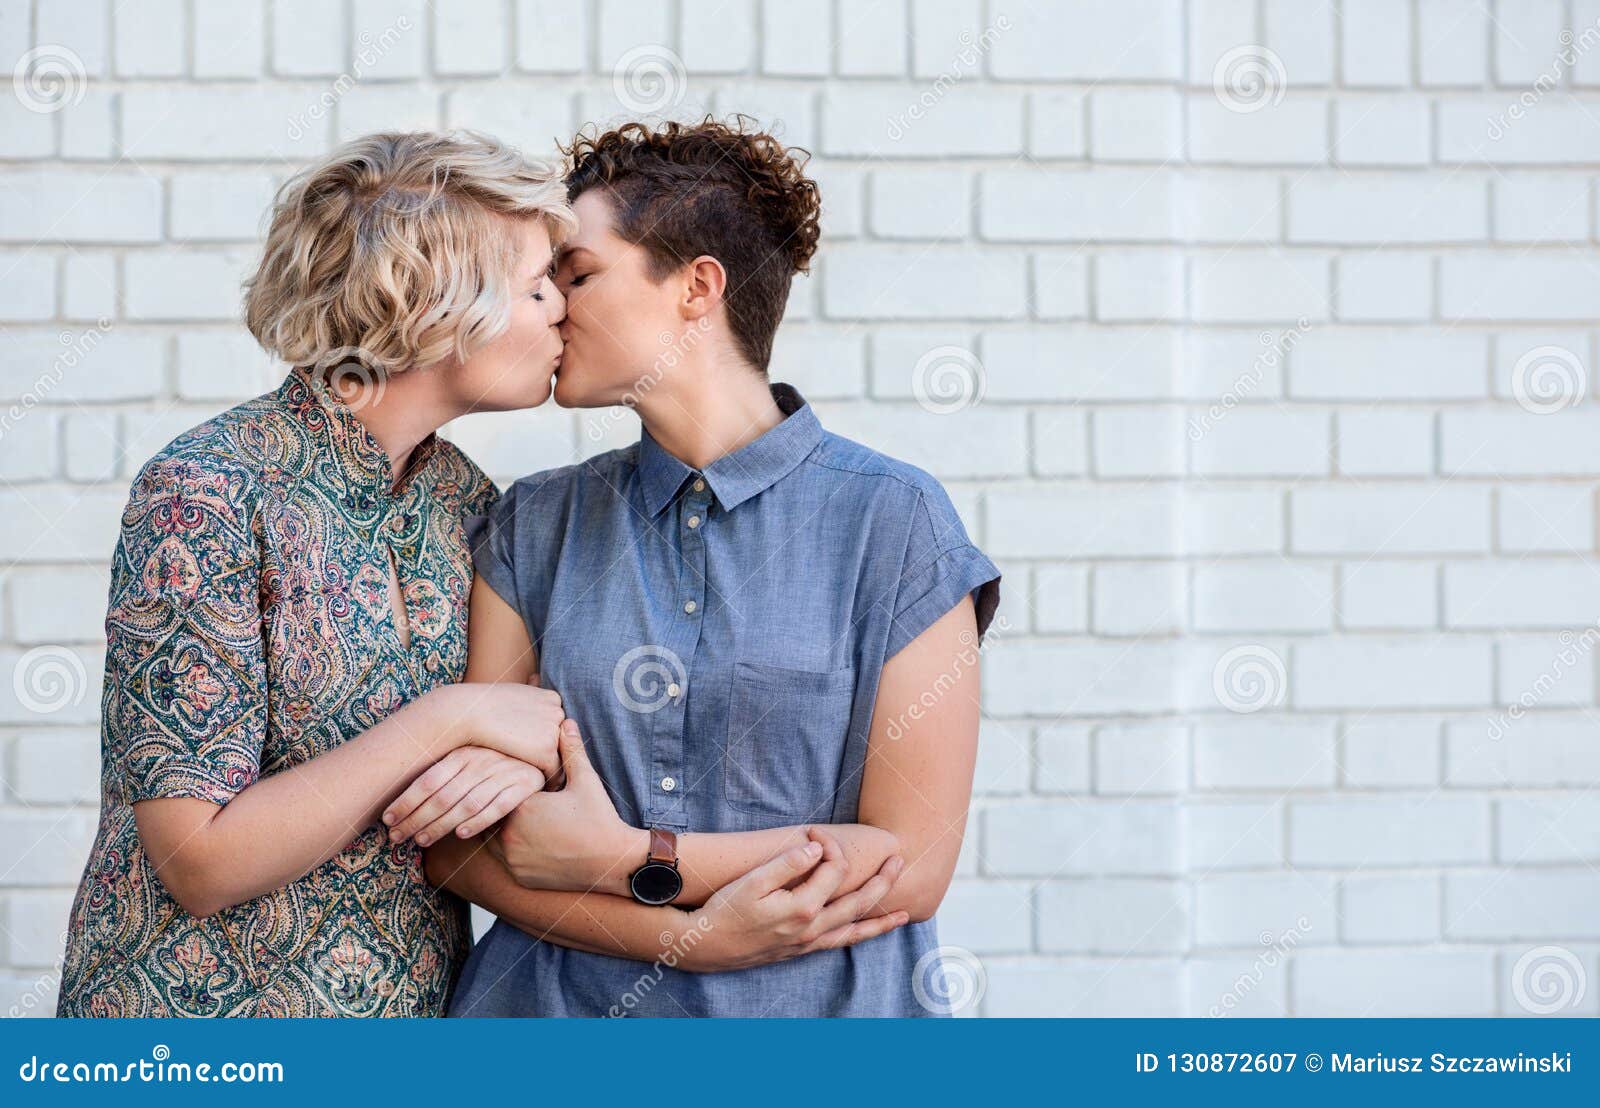 Loving Young Lesbian Couple Standing Outside Sharing a Kiss Stock Image